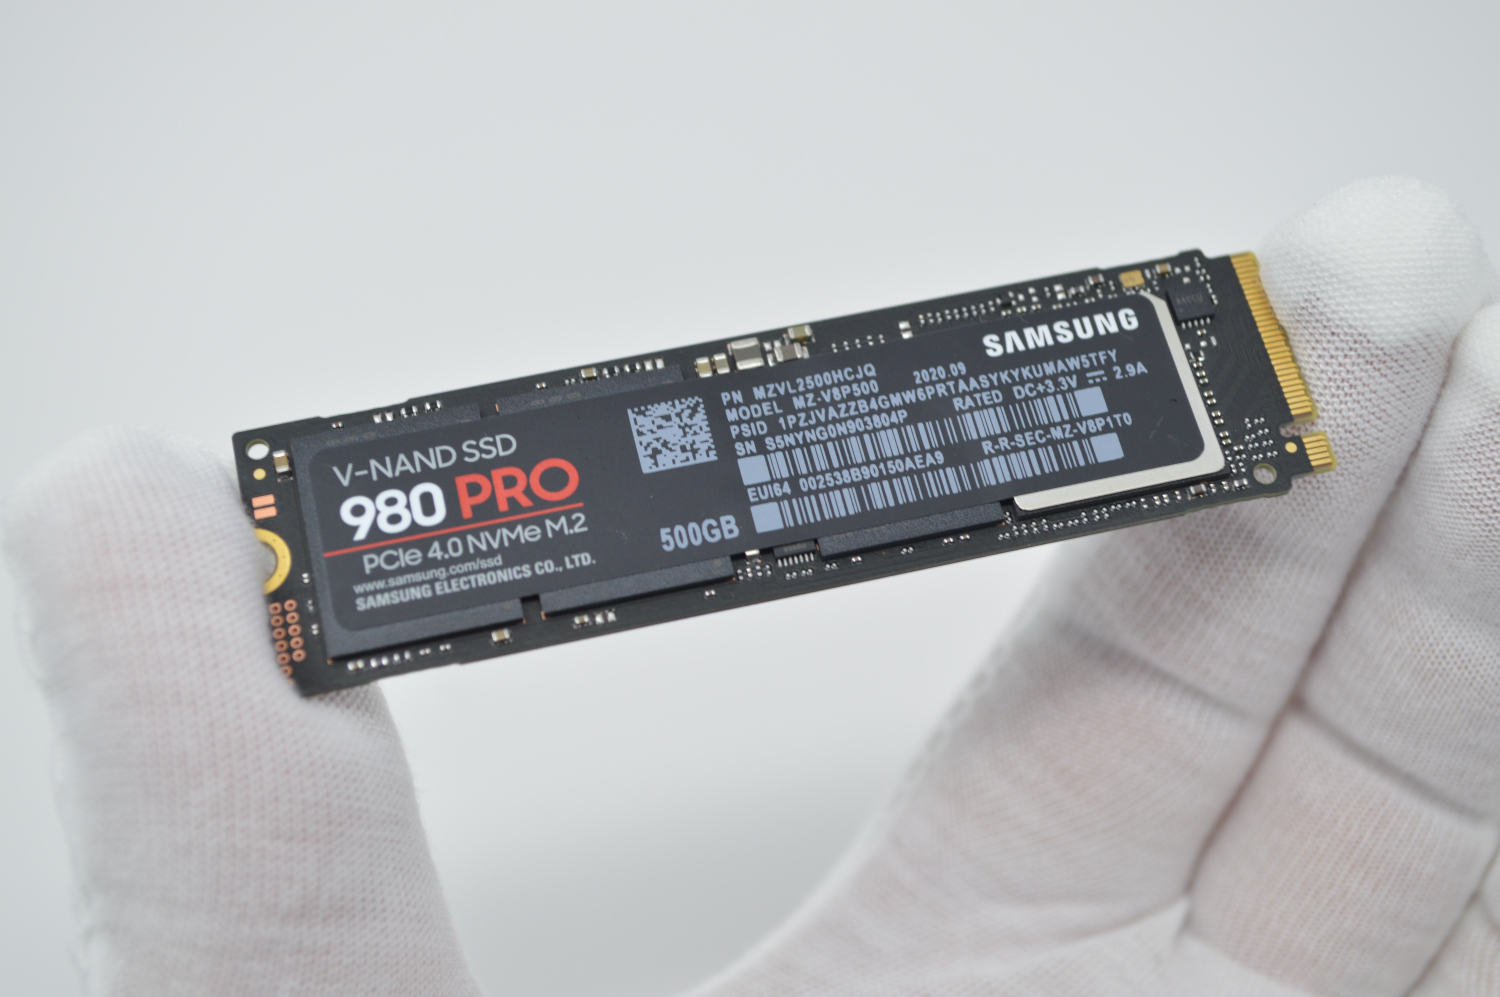 Stop Deserve invention Samsung 980 Pro 500GB PCIe Gen4 NVMe SSD Benchmarks Review